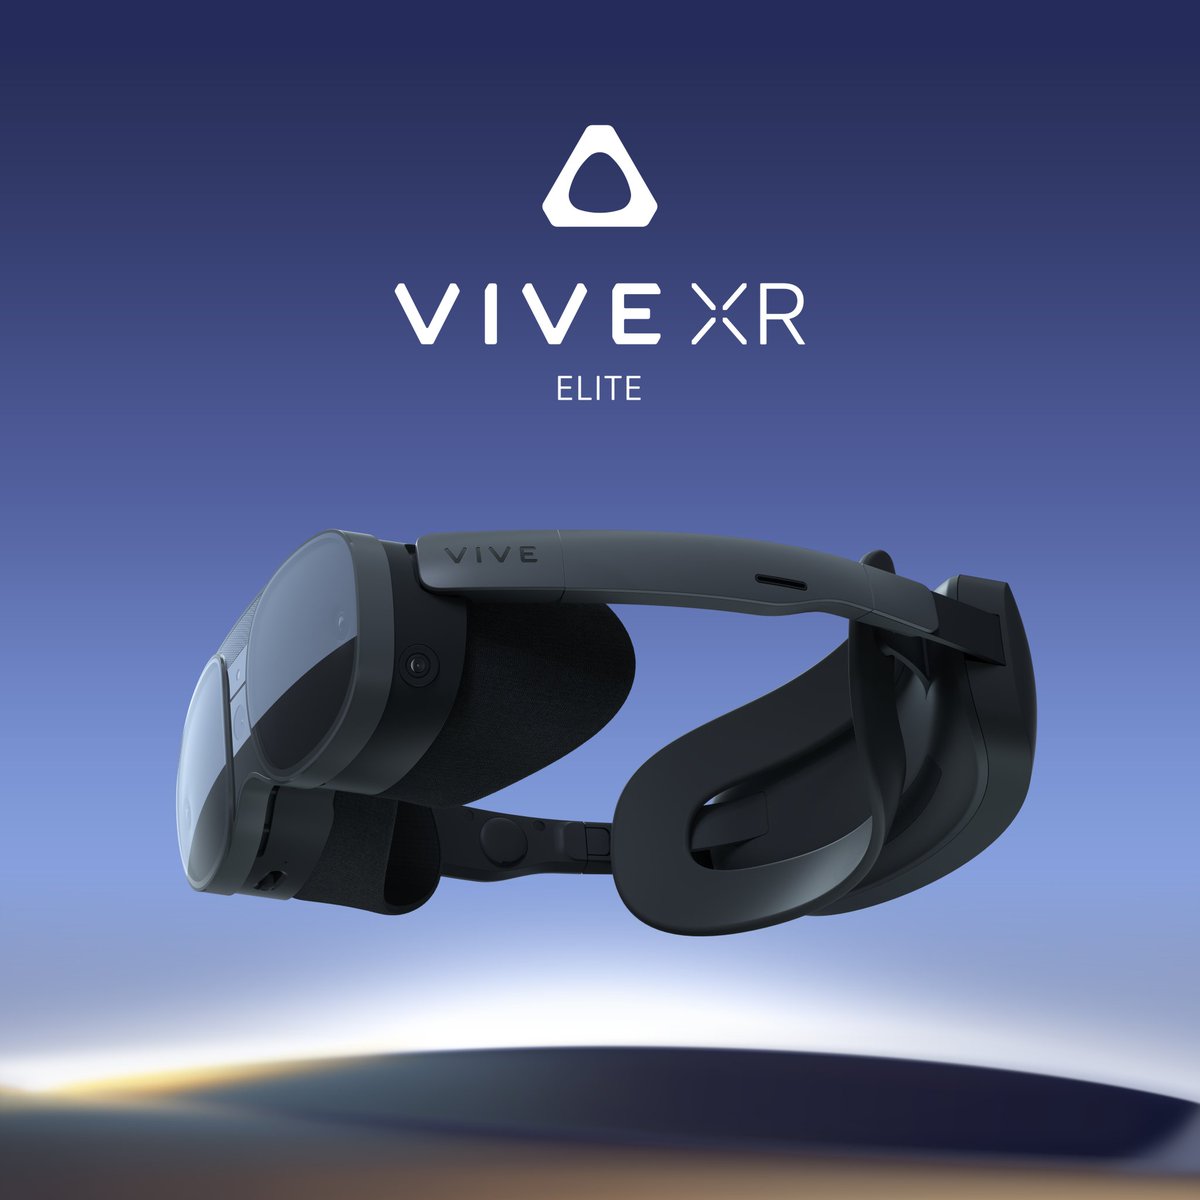 I've heard from a lot of people that the Vive XR elite really sucks.  In fact, I even hear it's missing a 3.5mm jack.